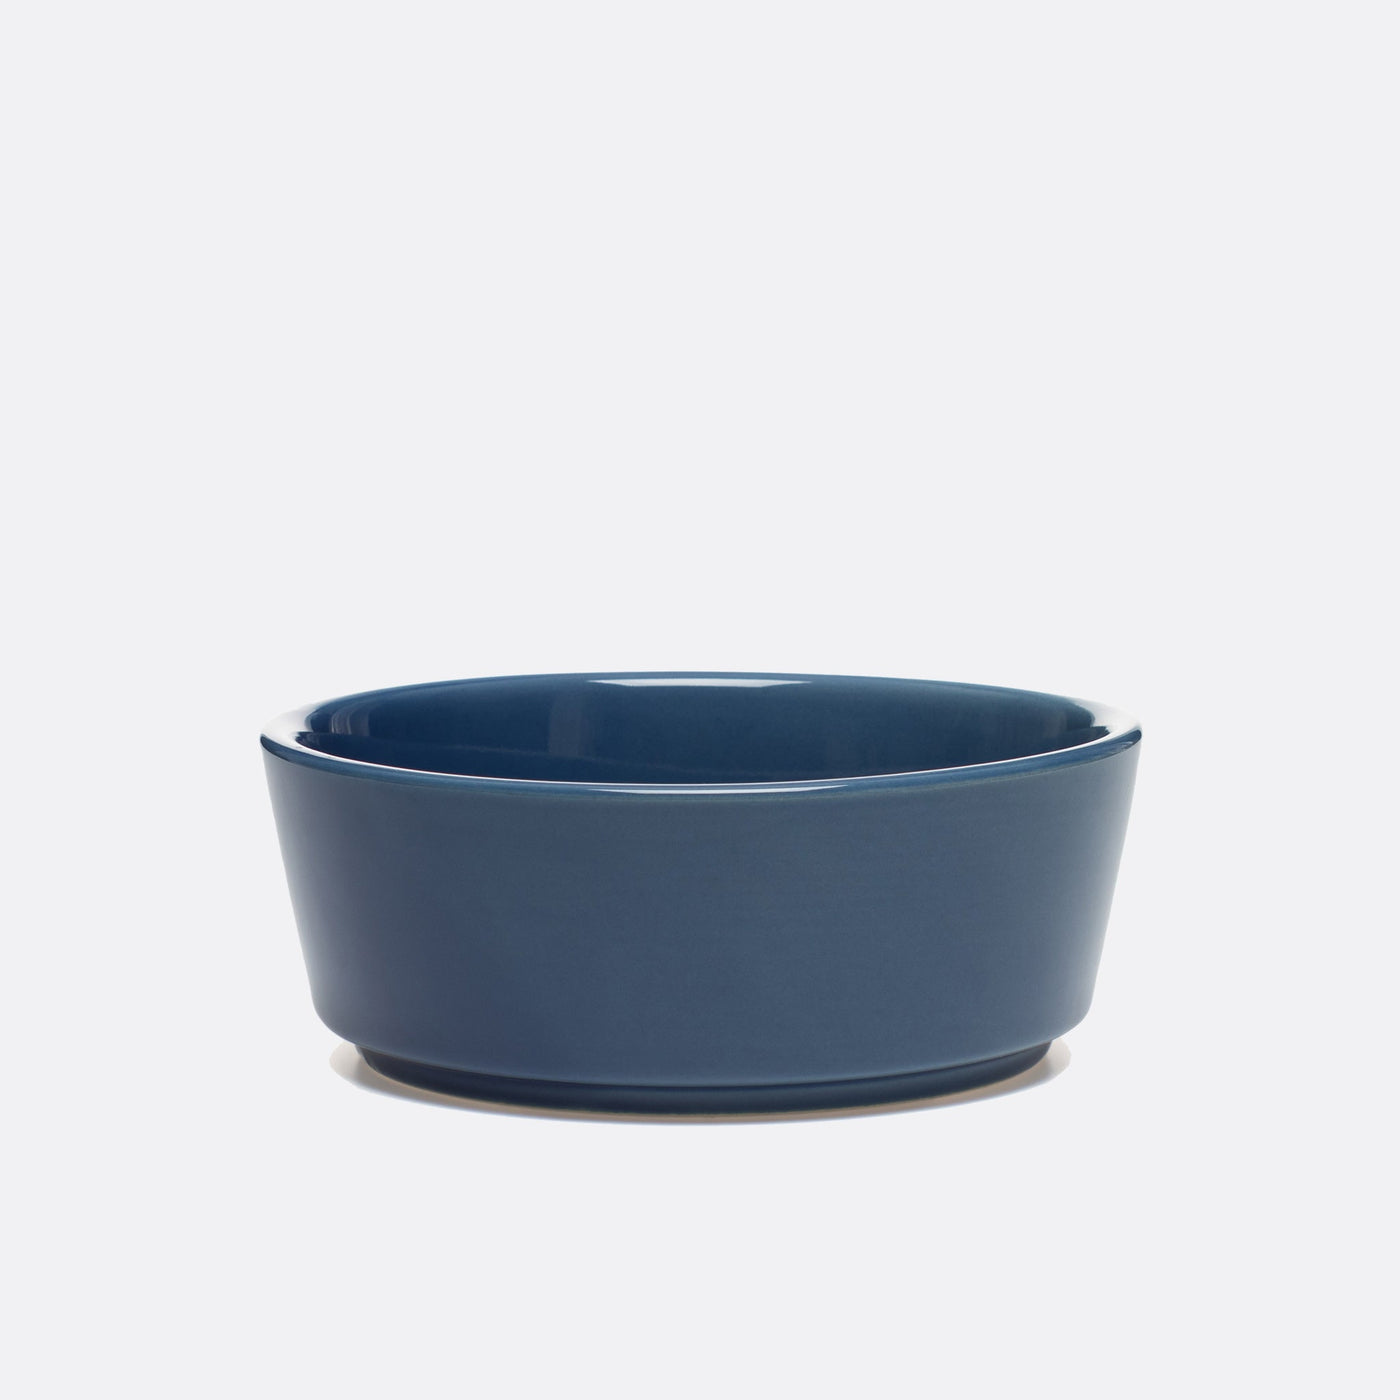 Simple Solid Bowl by Waggo